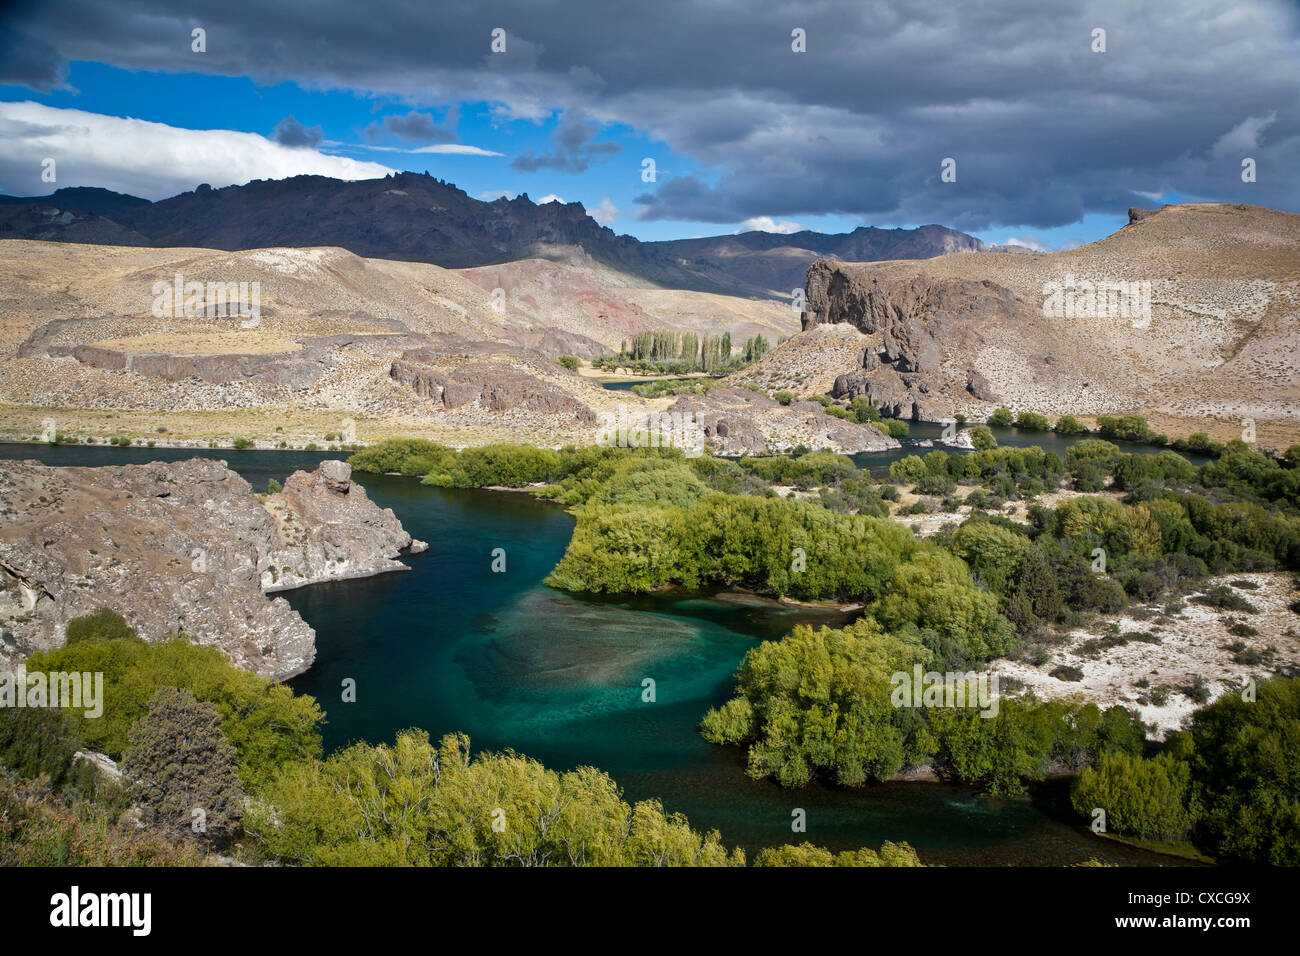 View over the Limay River in the lake district, Patagonia, Argentina. Stock Photo